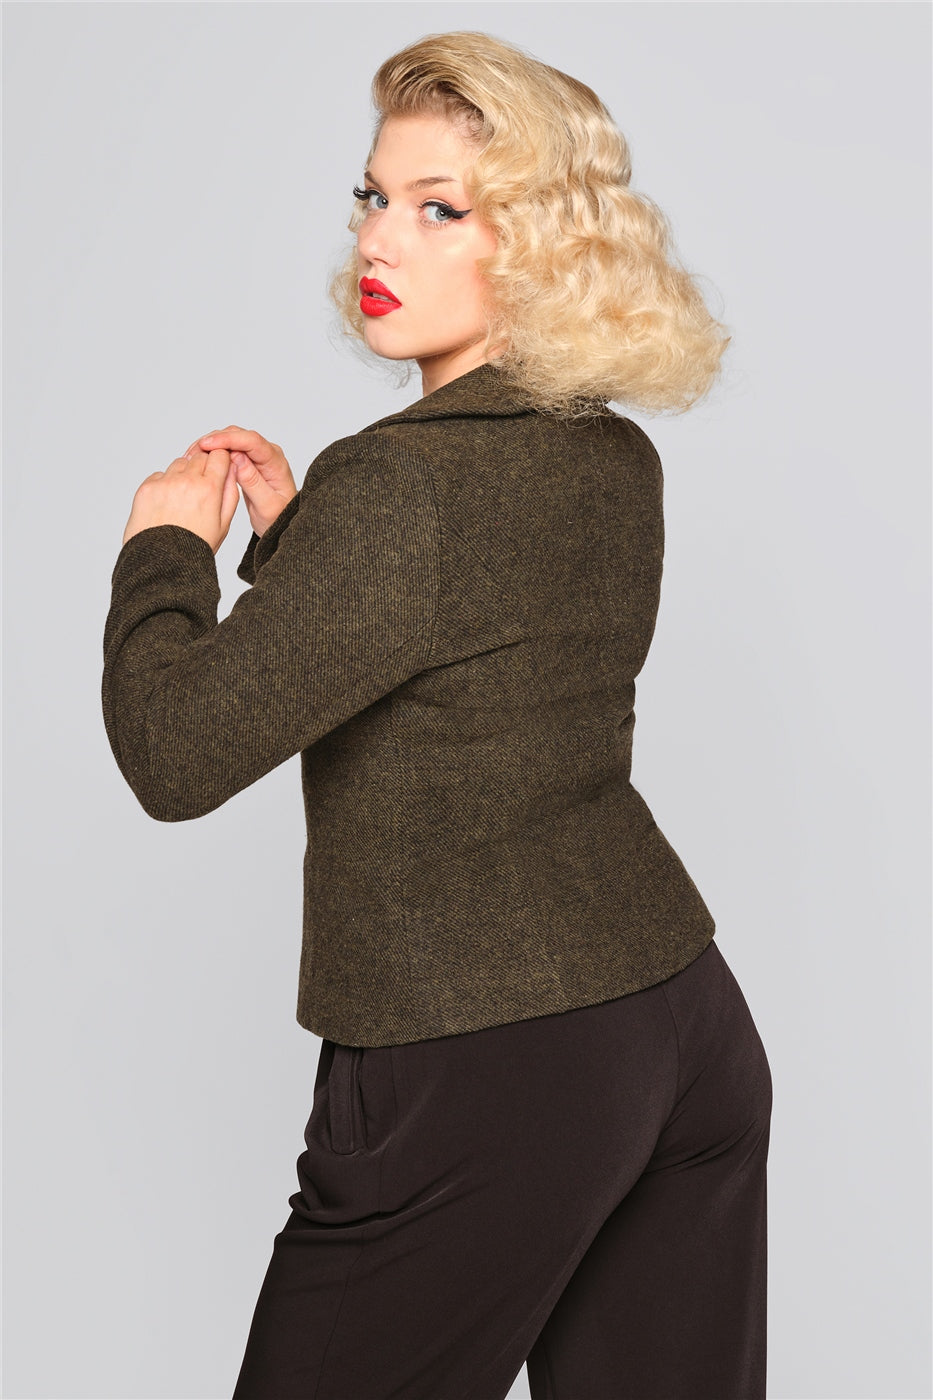 Blonde woman with red lipstick looking over her shoulder wearing the green Molly Riding Jacket by Collectif and black swing trousers